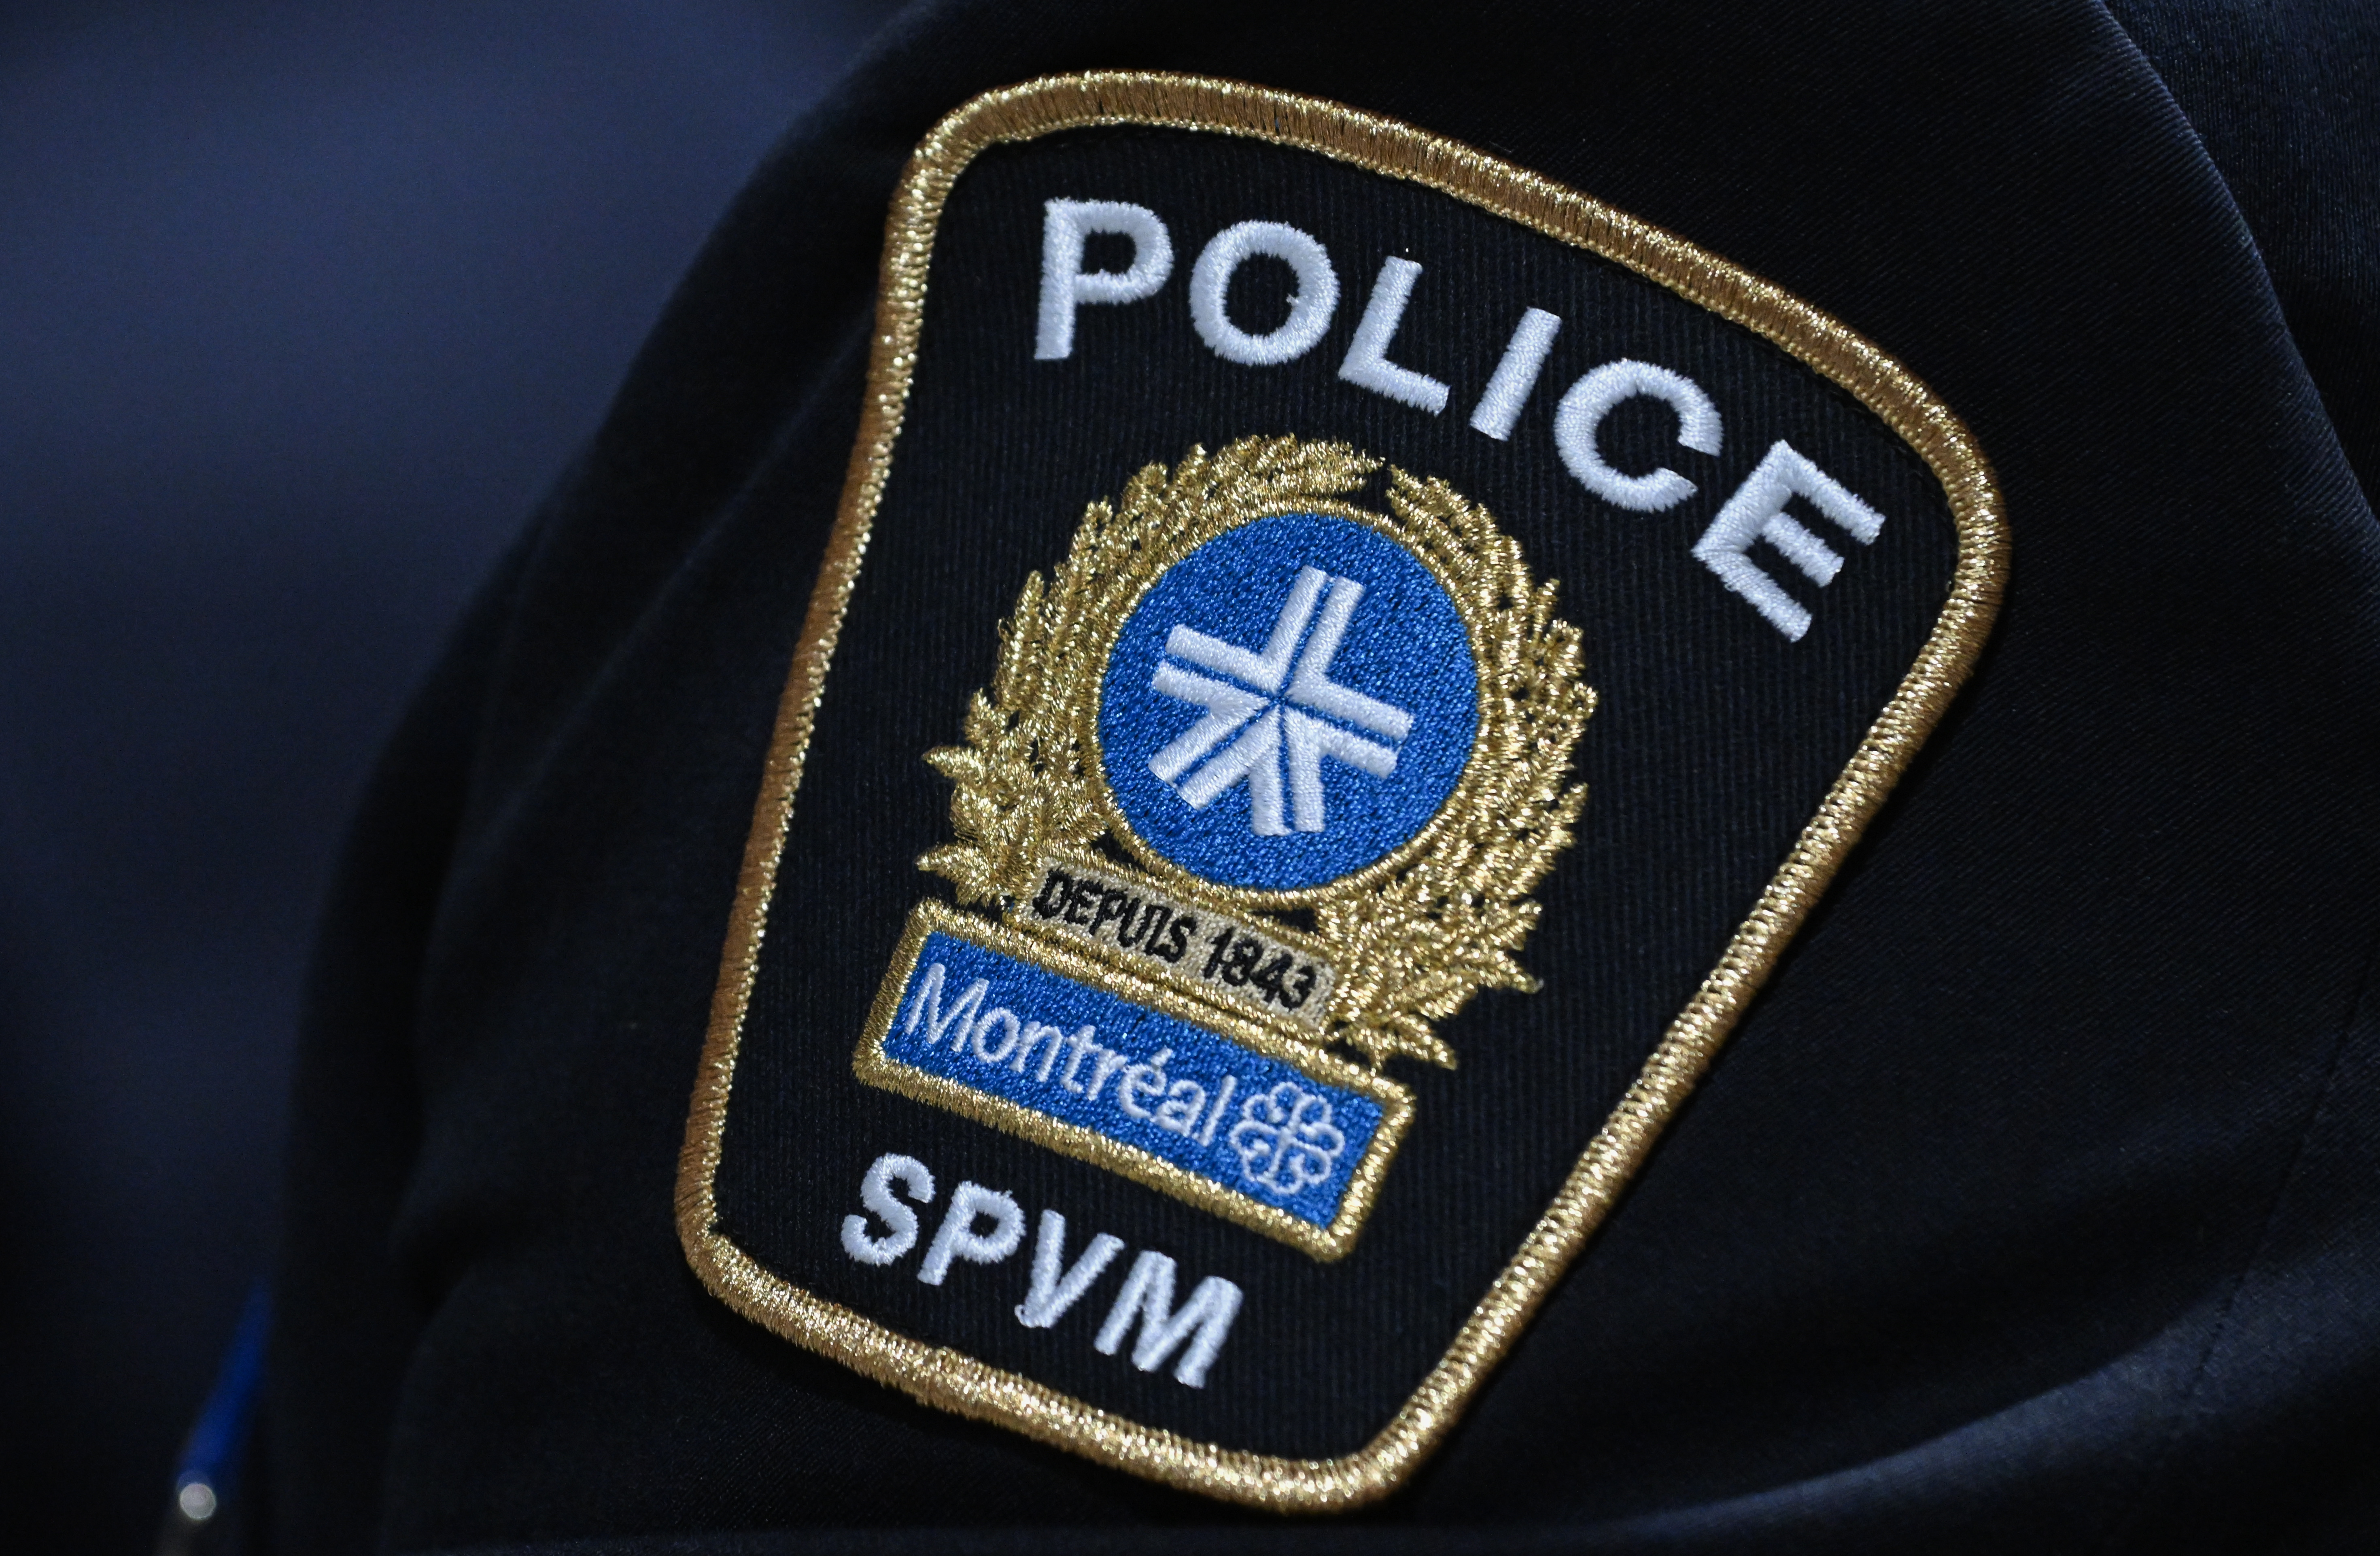 Man found dead in Montreal’s Plateau neighbourhood was homicide victim, police say